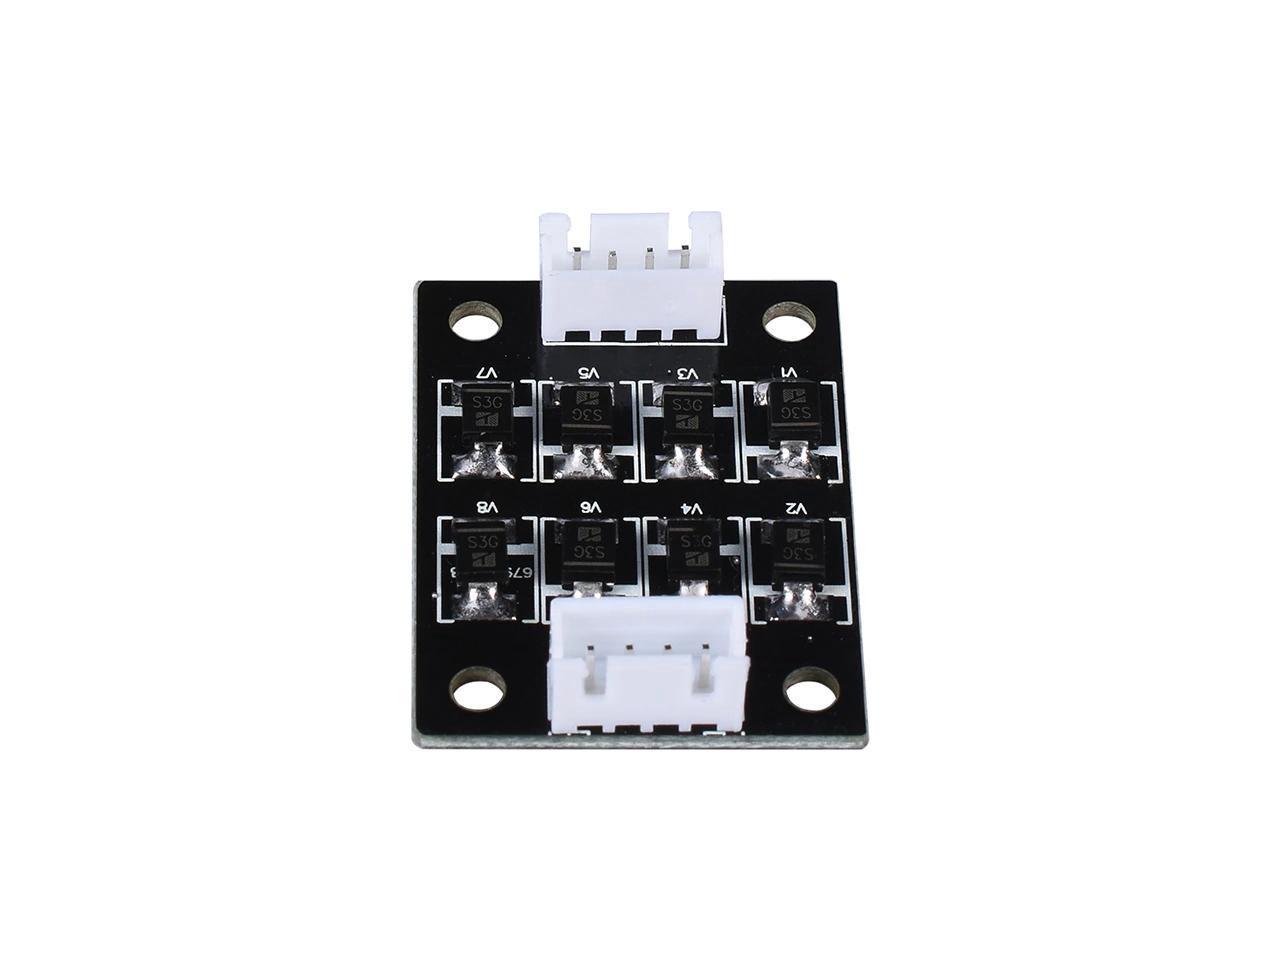 1PCS New TL-Smoother V1.0 Addon Module For 3D pinter Motor Drivers Accessories Y 